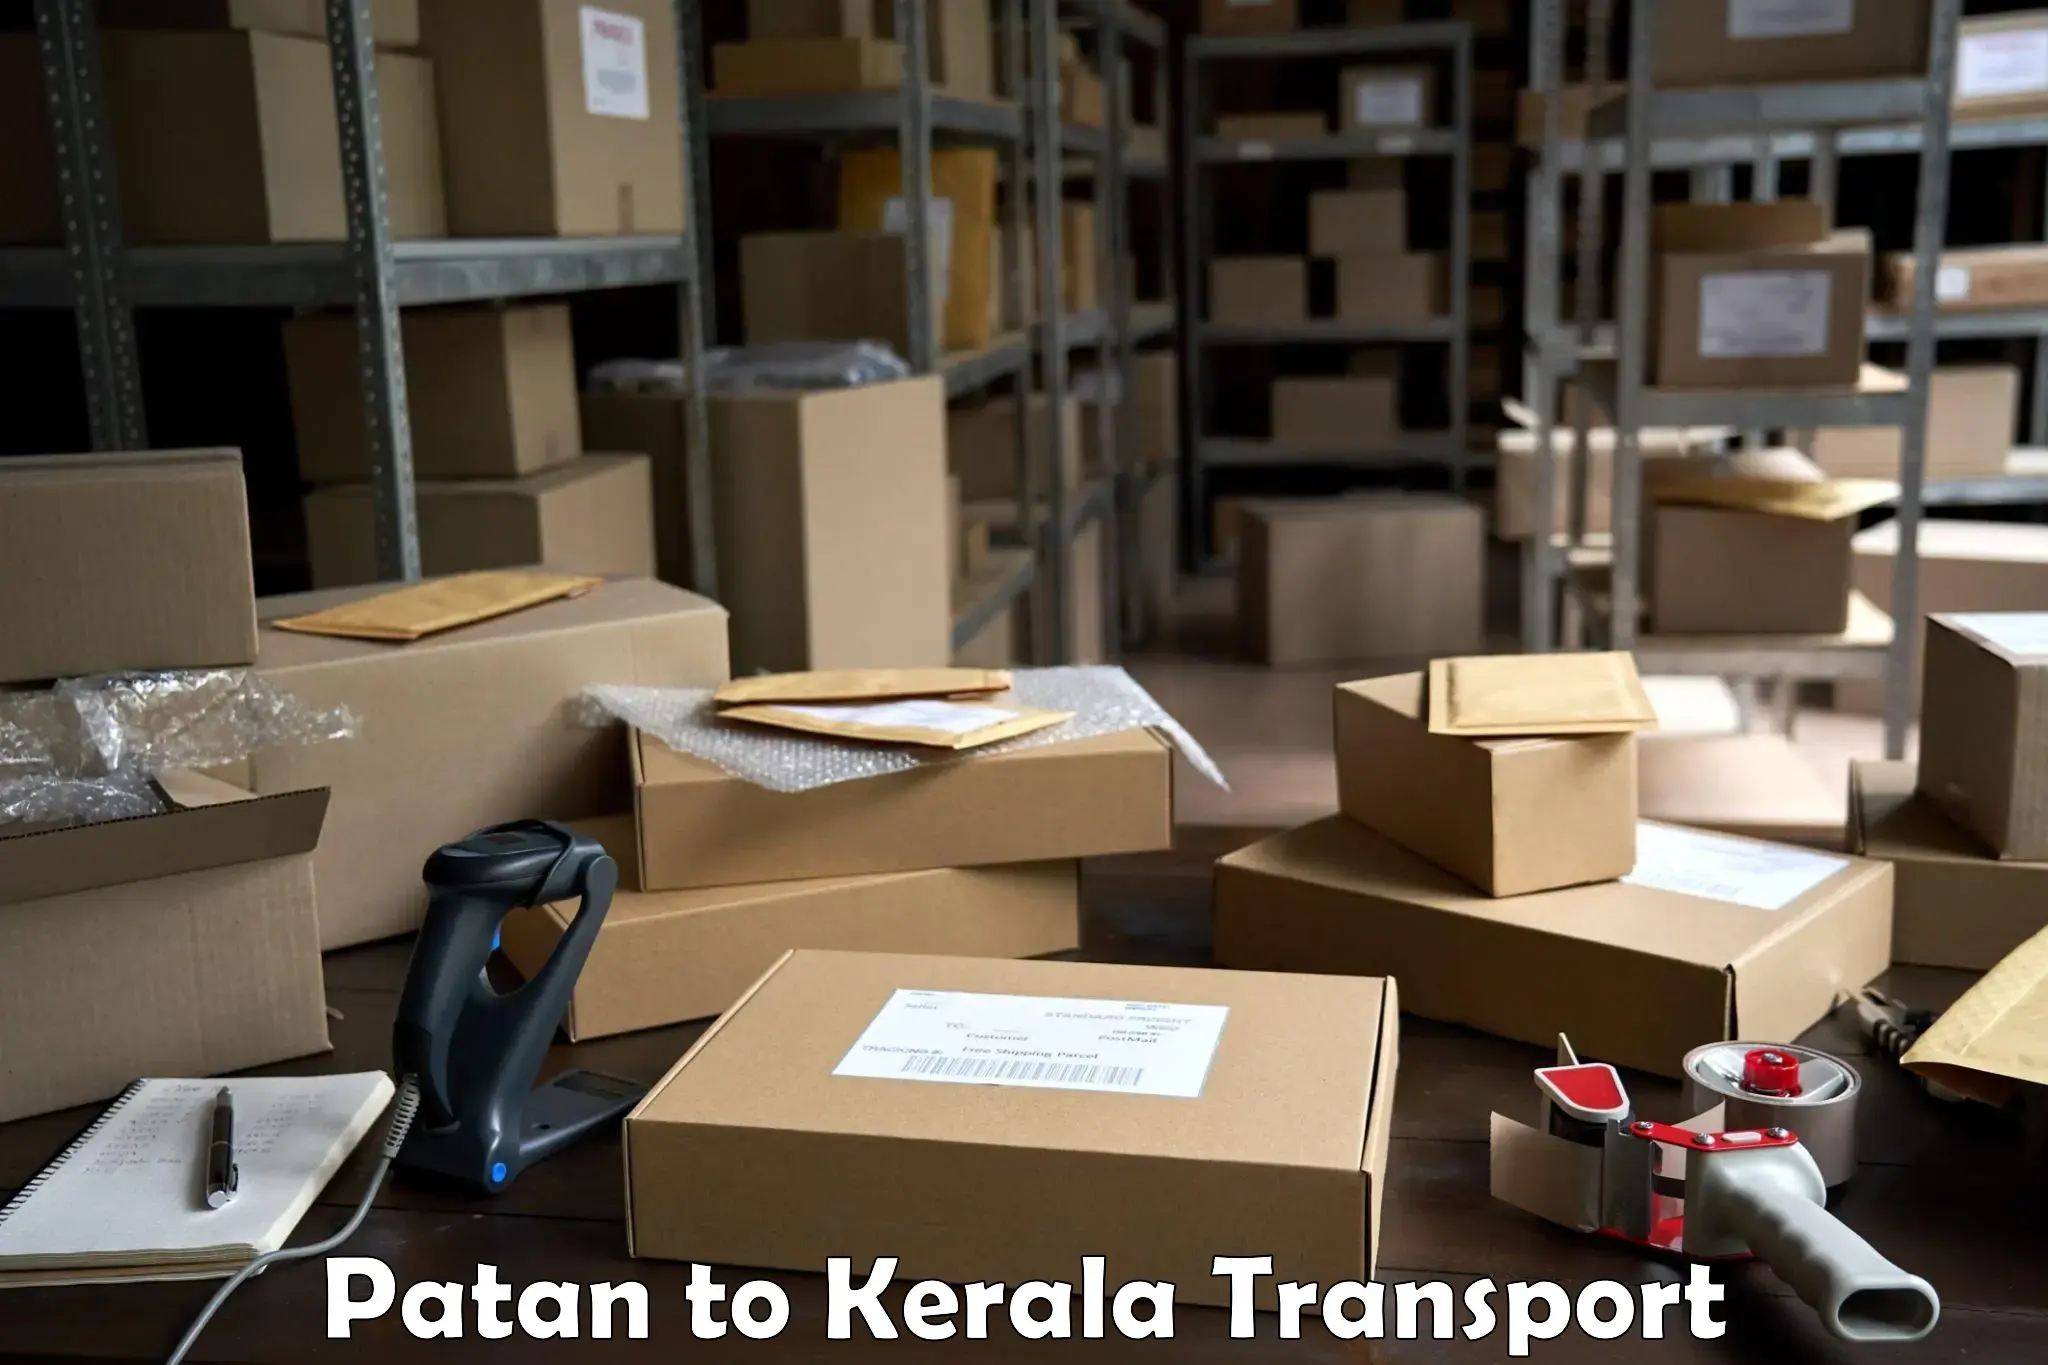 Commercial transport service Patan to Kochi